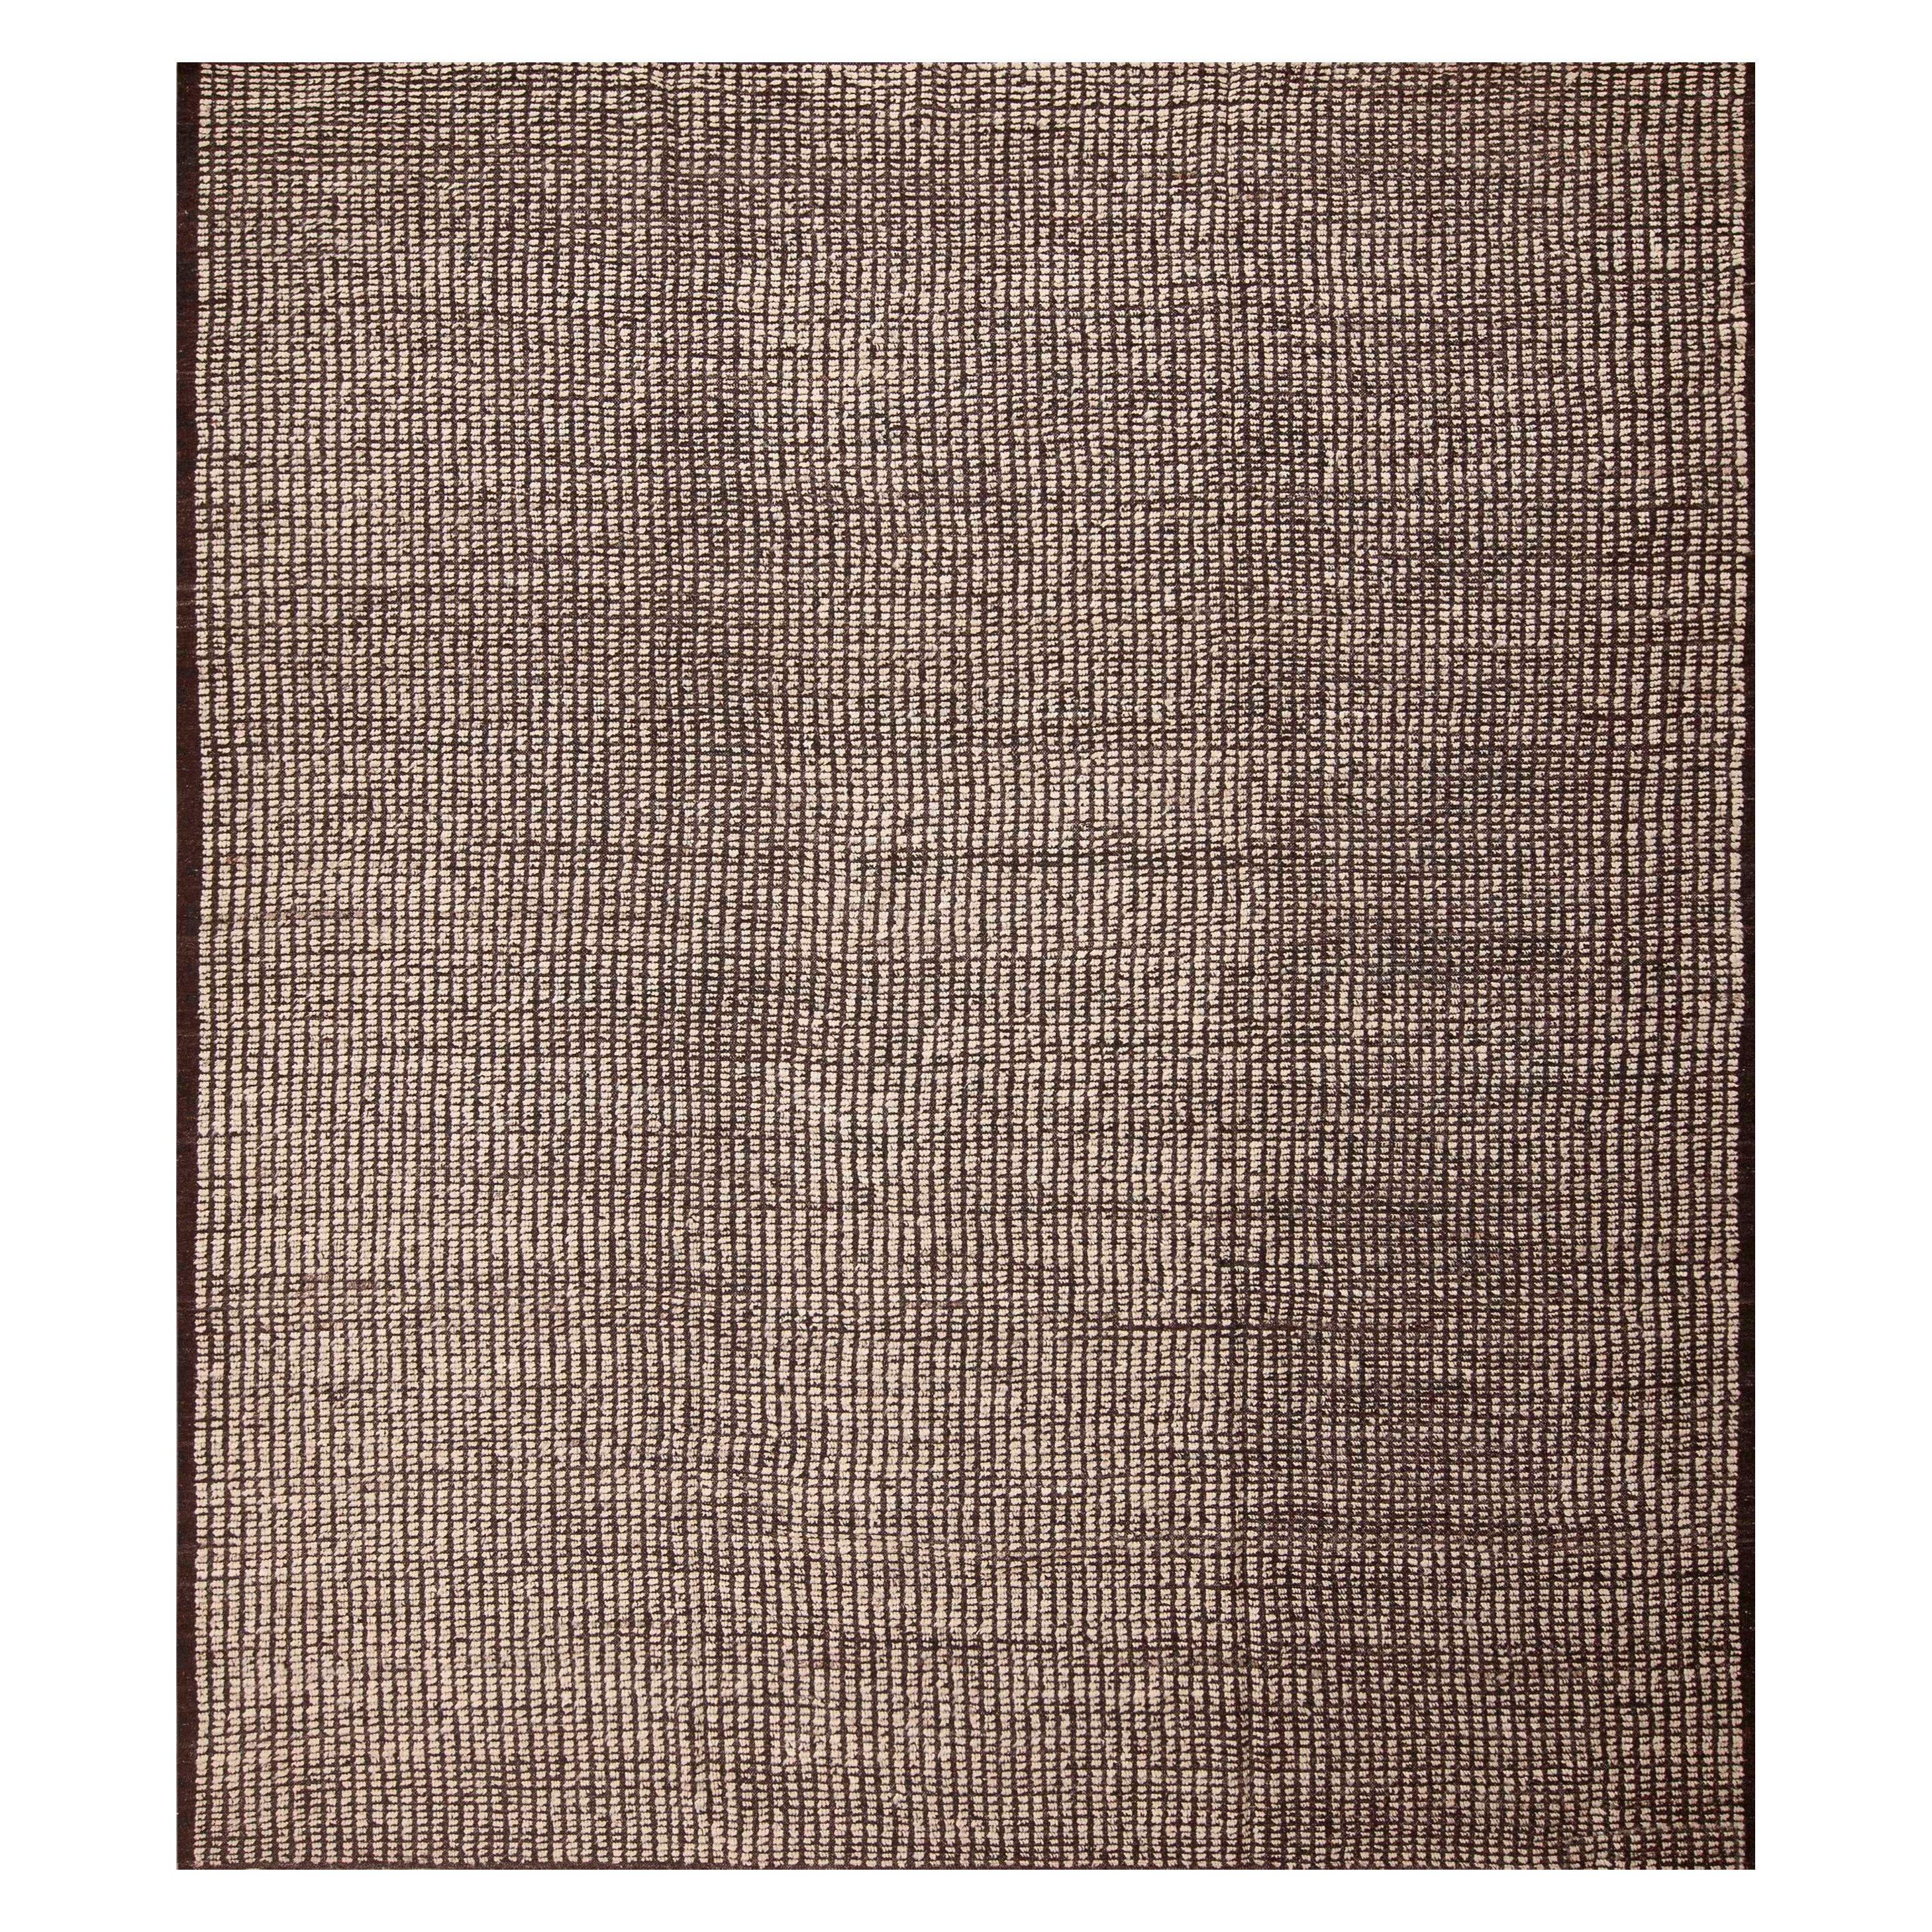 The Collective Square Shape Modern Cream and Brown Tapis de sol 10'4" x 11'5" (en anglais)